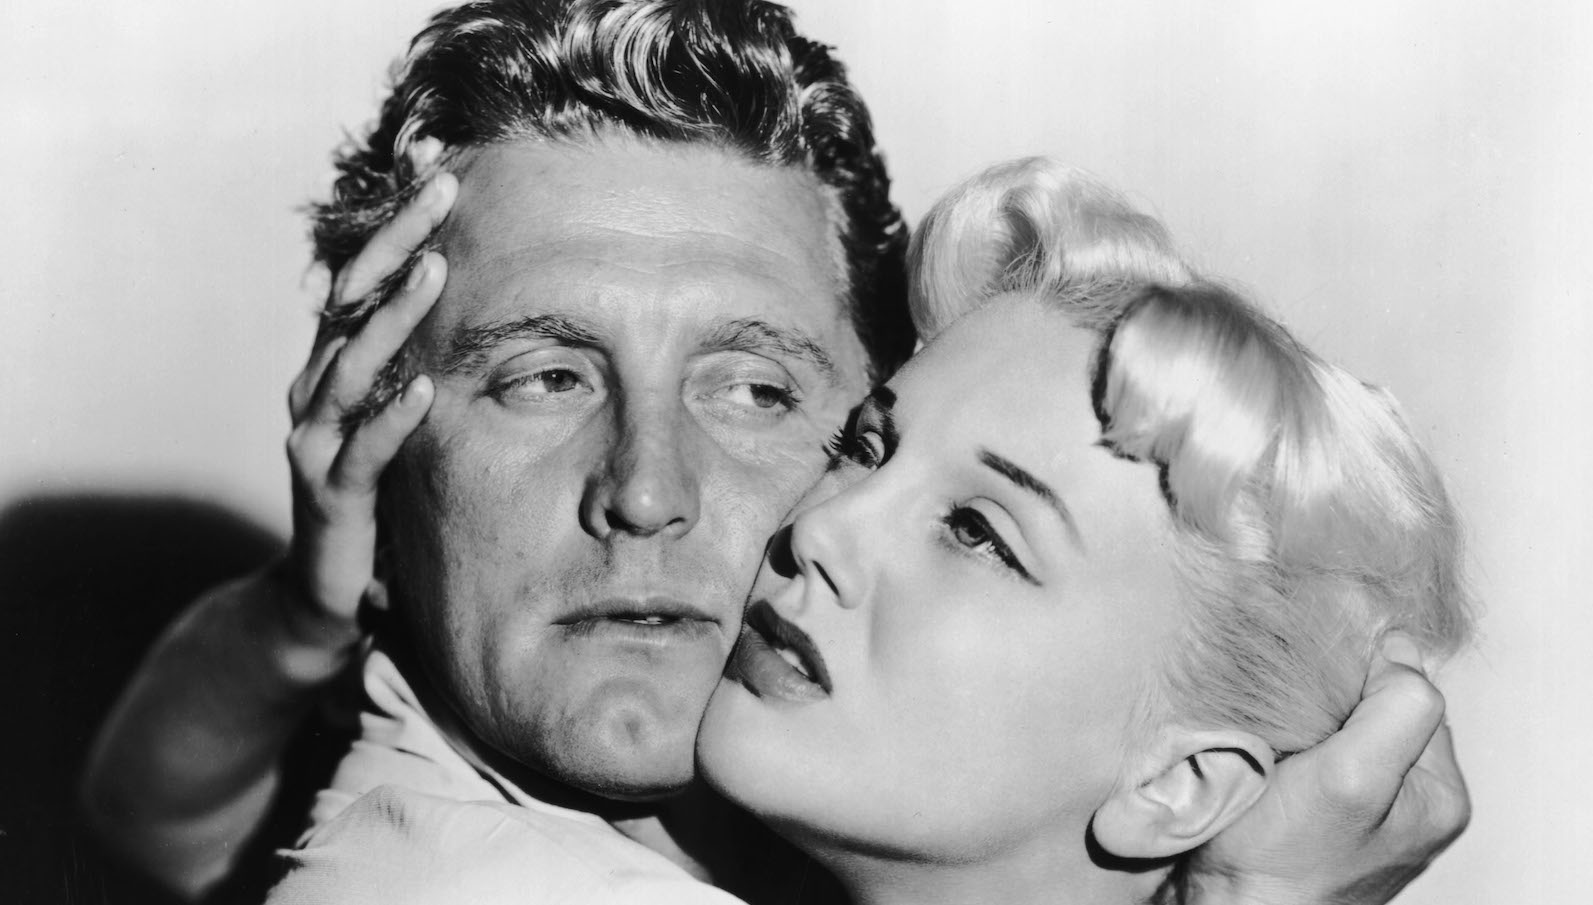 A man and woman hold each other's heads uncomfortably tightly as they look off into the distance in a black and white image